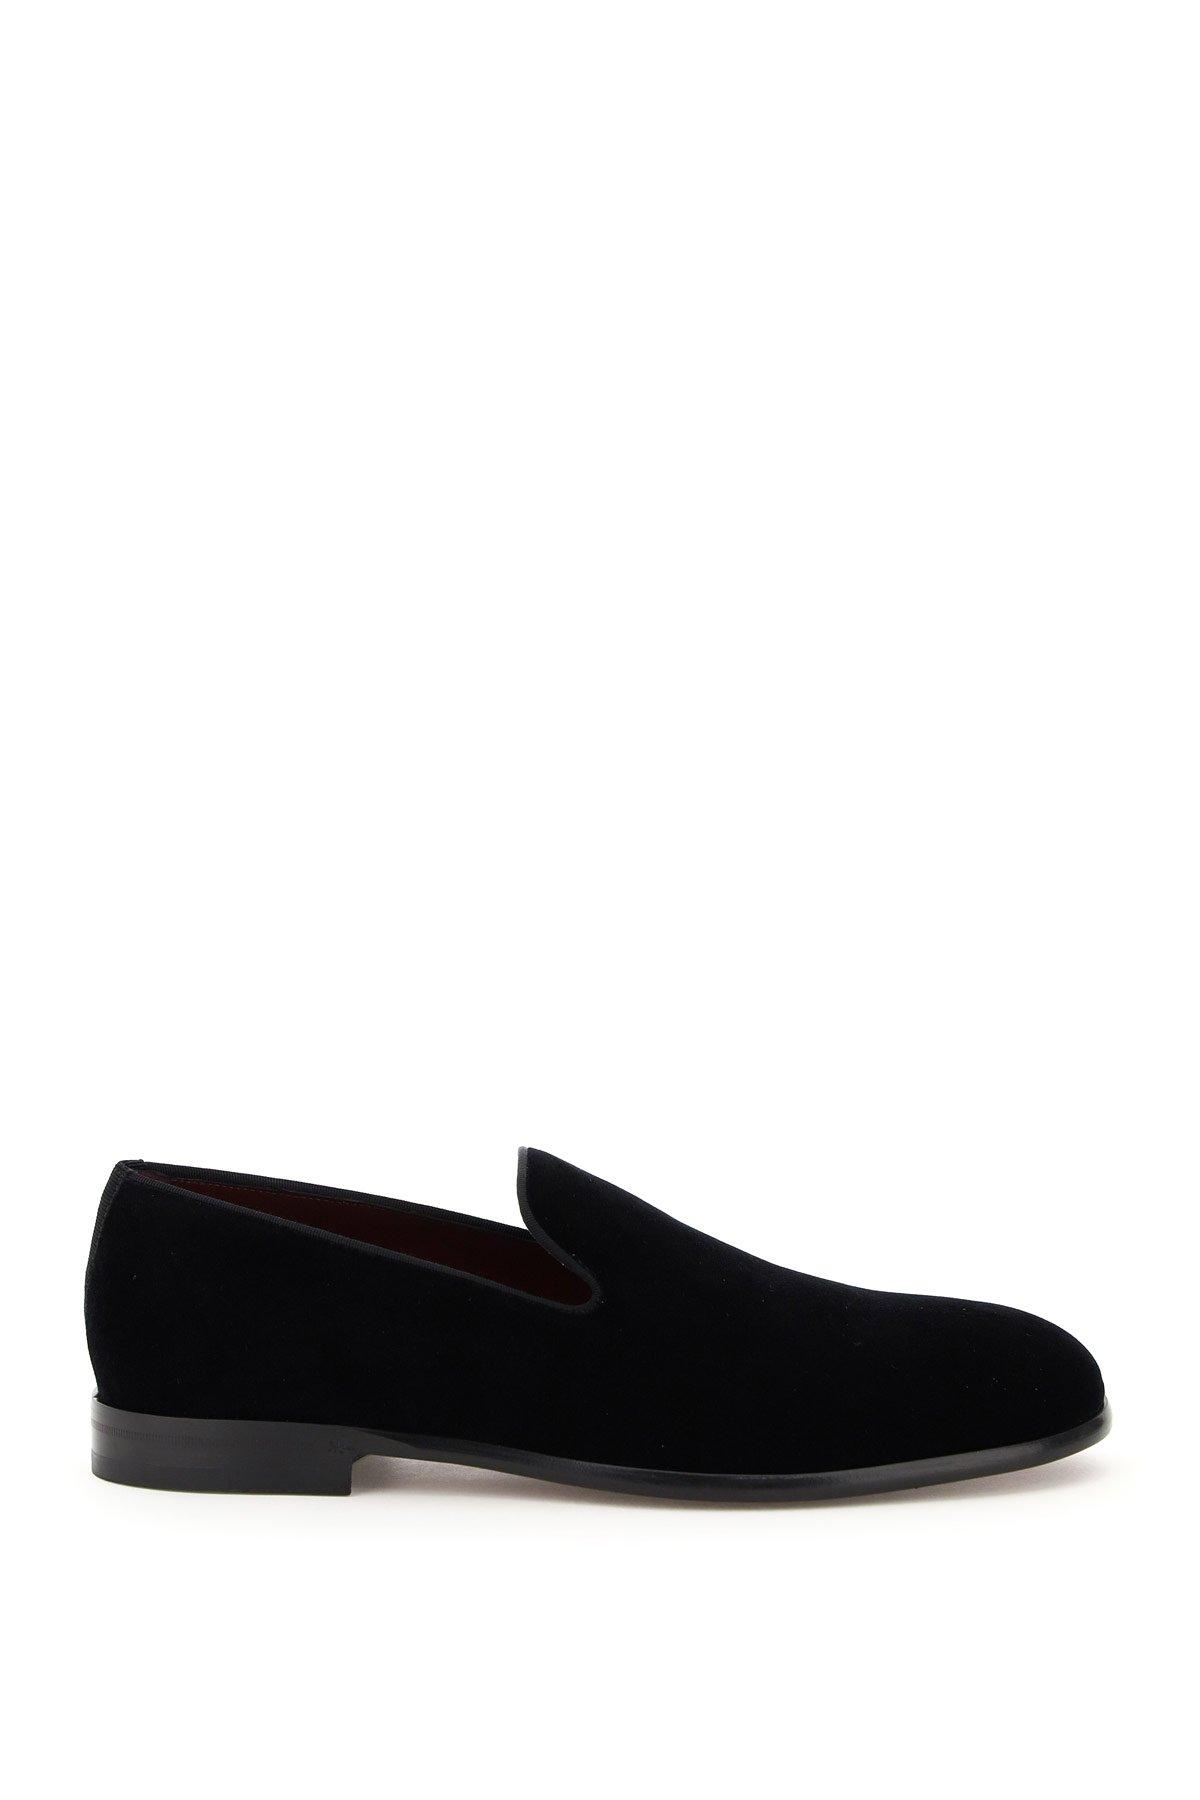 Dolce & Gabbana Leather Slip-on Loafers in Black for Men - Save 7% - Lyst